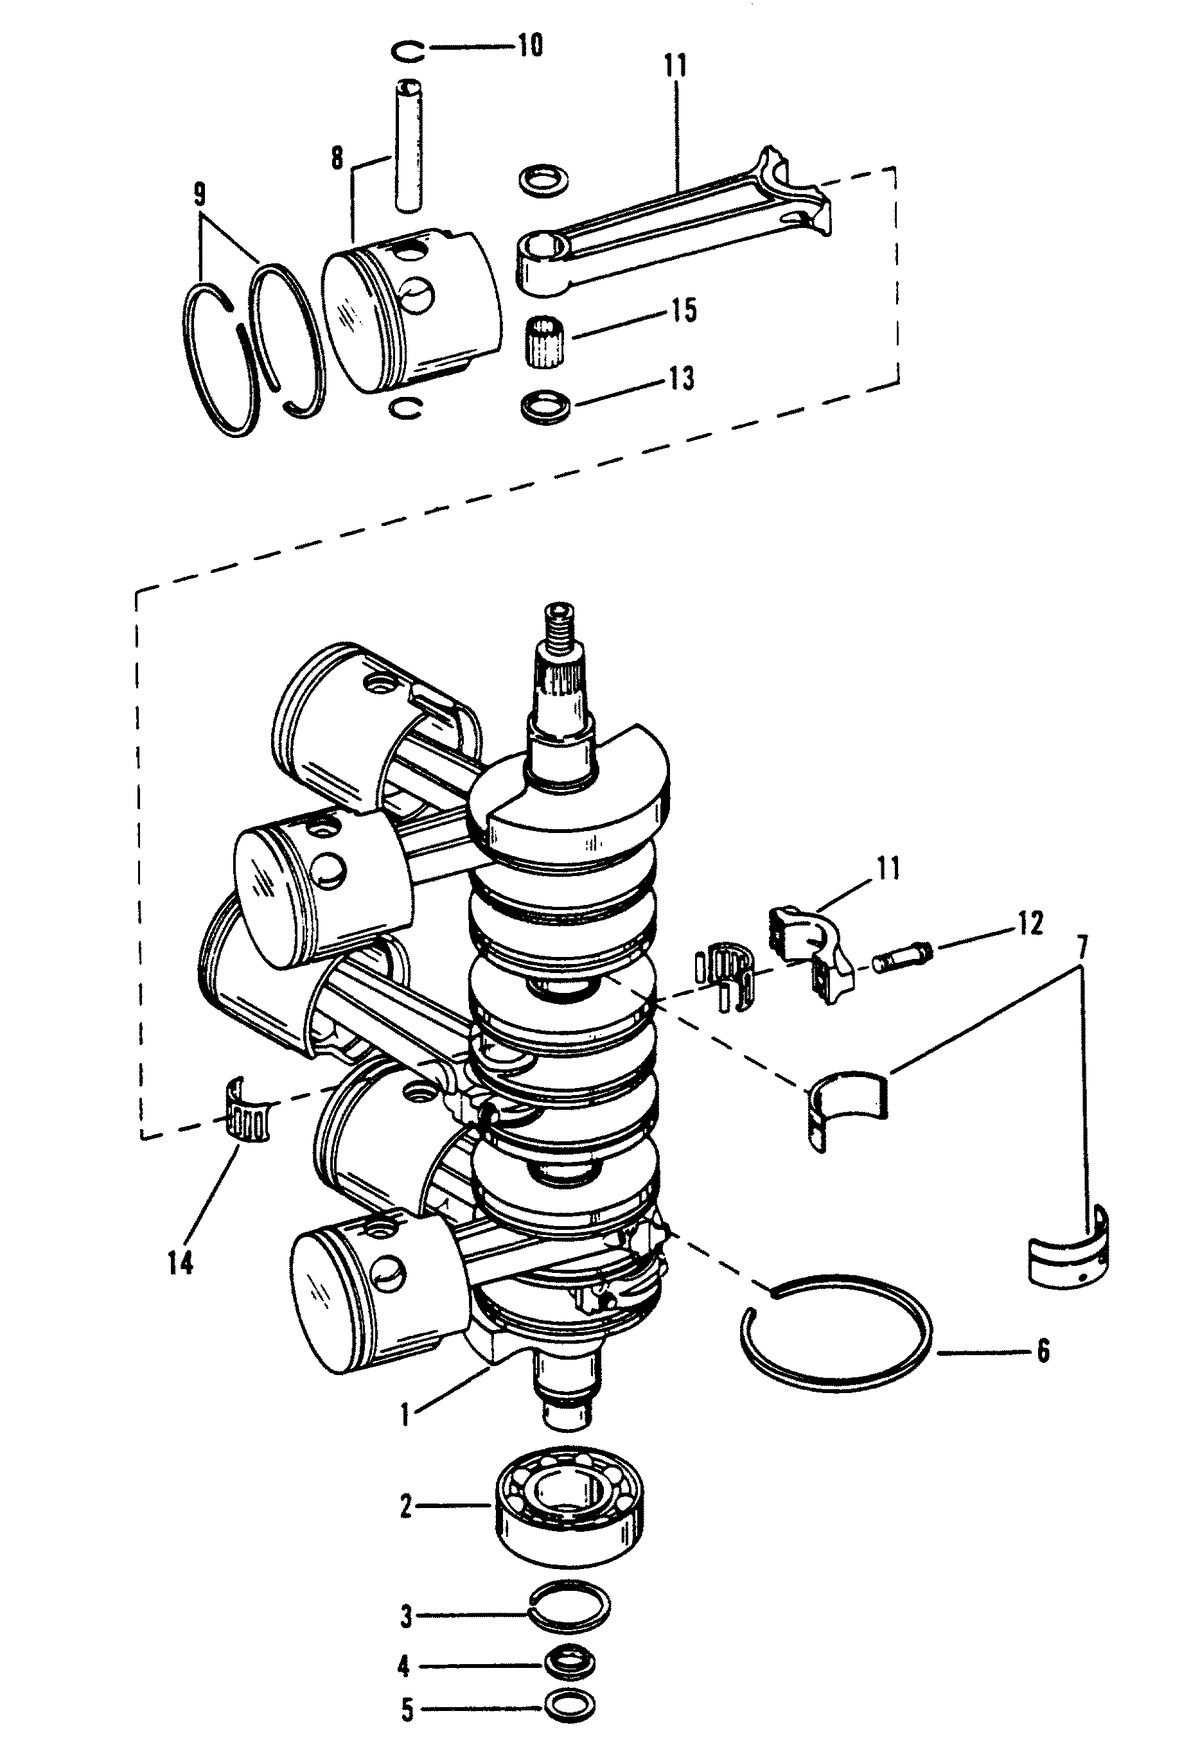 RACE OUTBOARD XR-2 MAGNUM CRANKSHAFT, PISTONS AND CONNECTING RODS